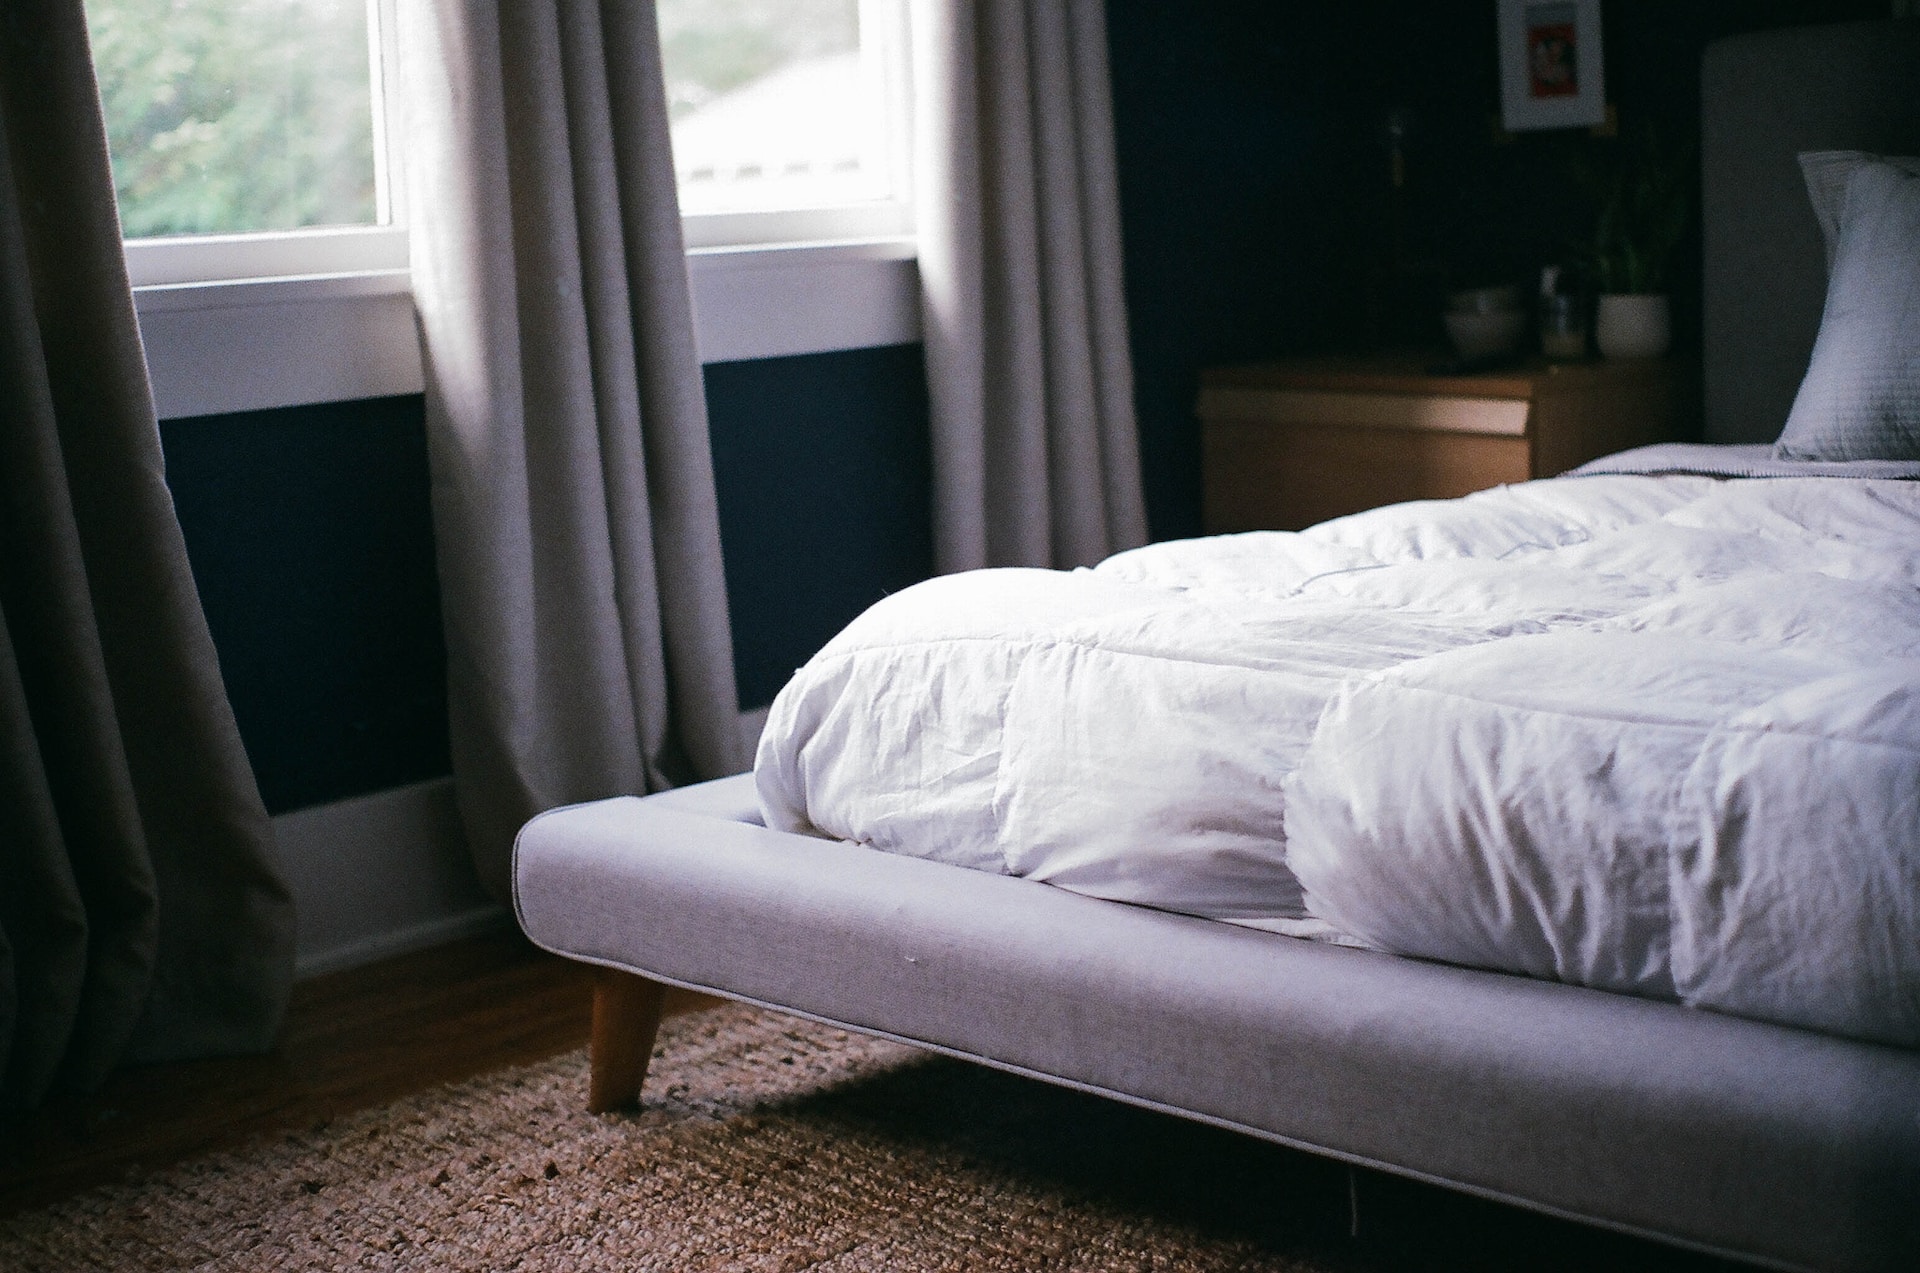 Having a Hard Time Finding a Mattress? Here's 5 Tips on How to Get Your Ideal Mattress